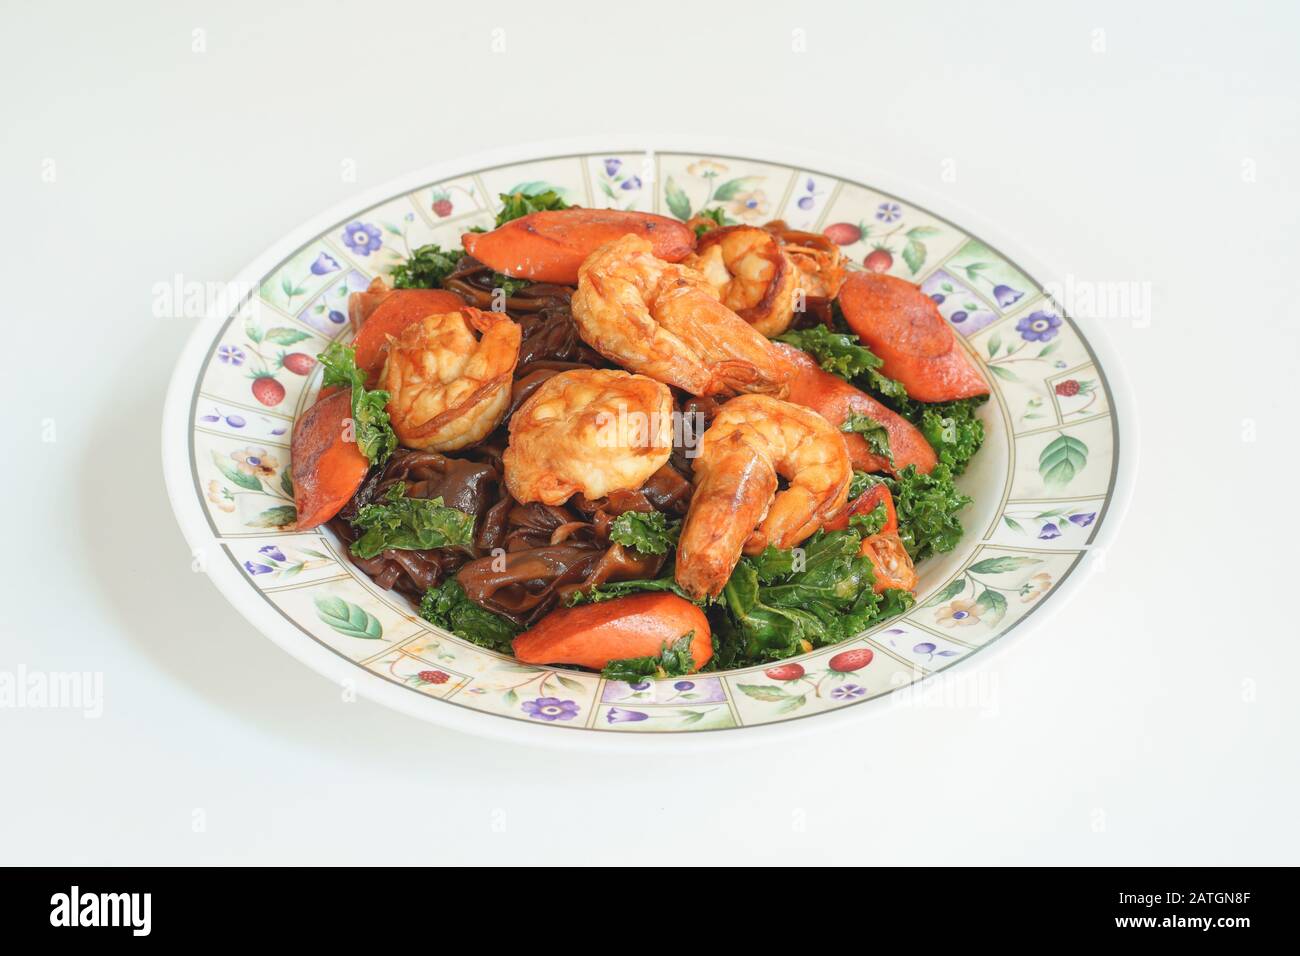 Stir fried Flat Noodle with black soy sauce, shrimps, Kale and Sausages. Thai food from chinese culture. Stock Photo